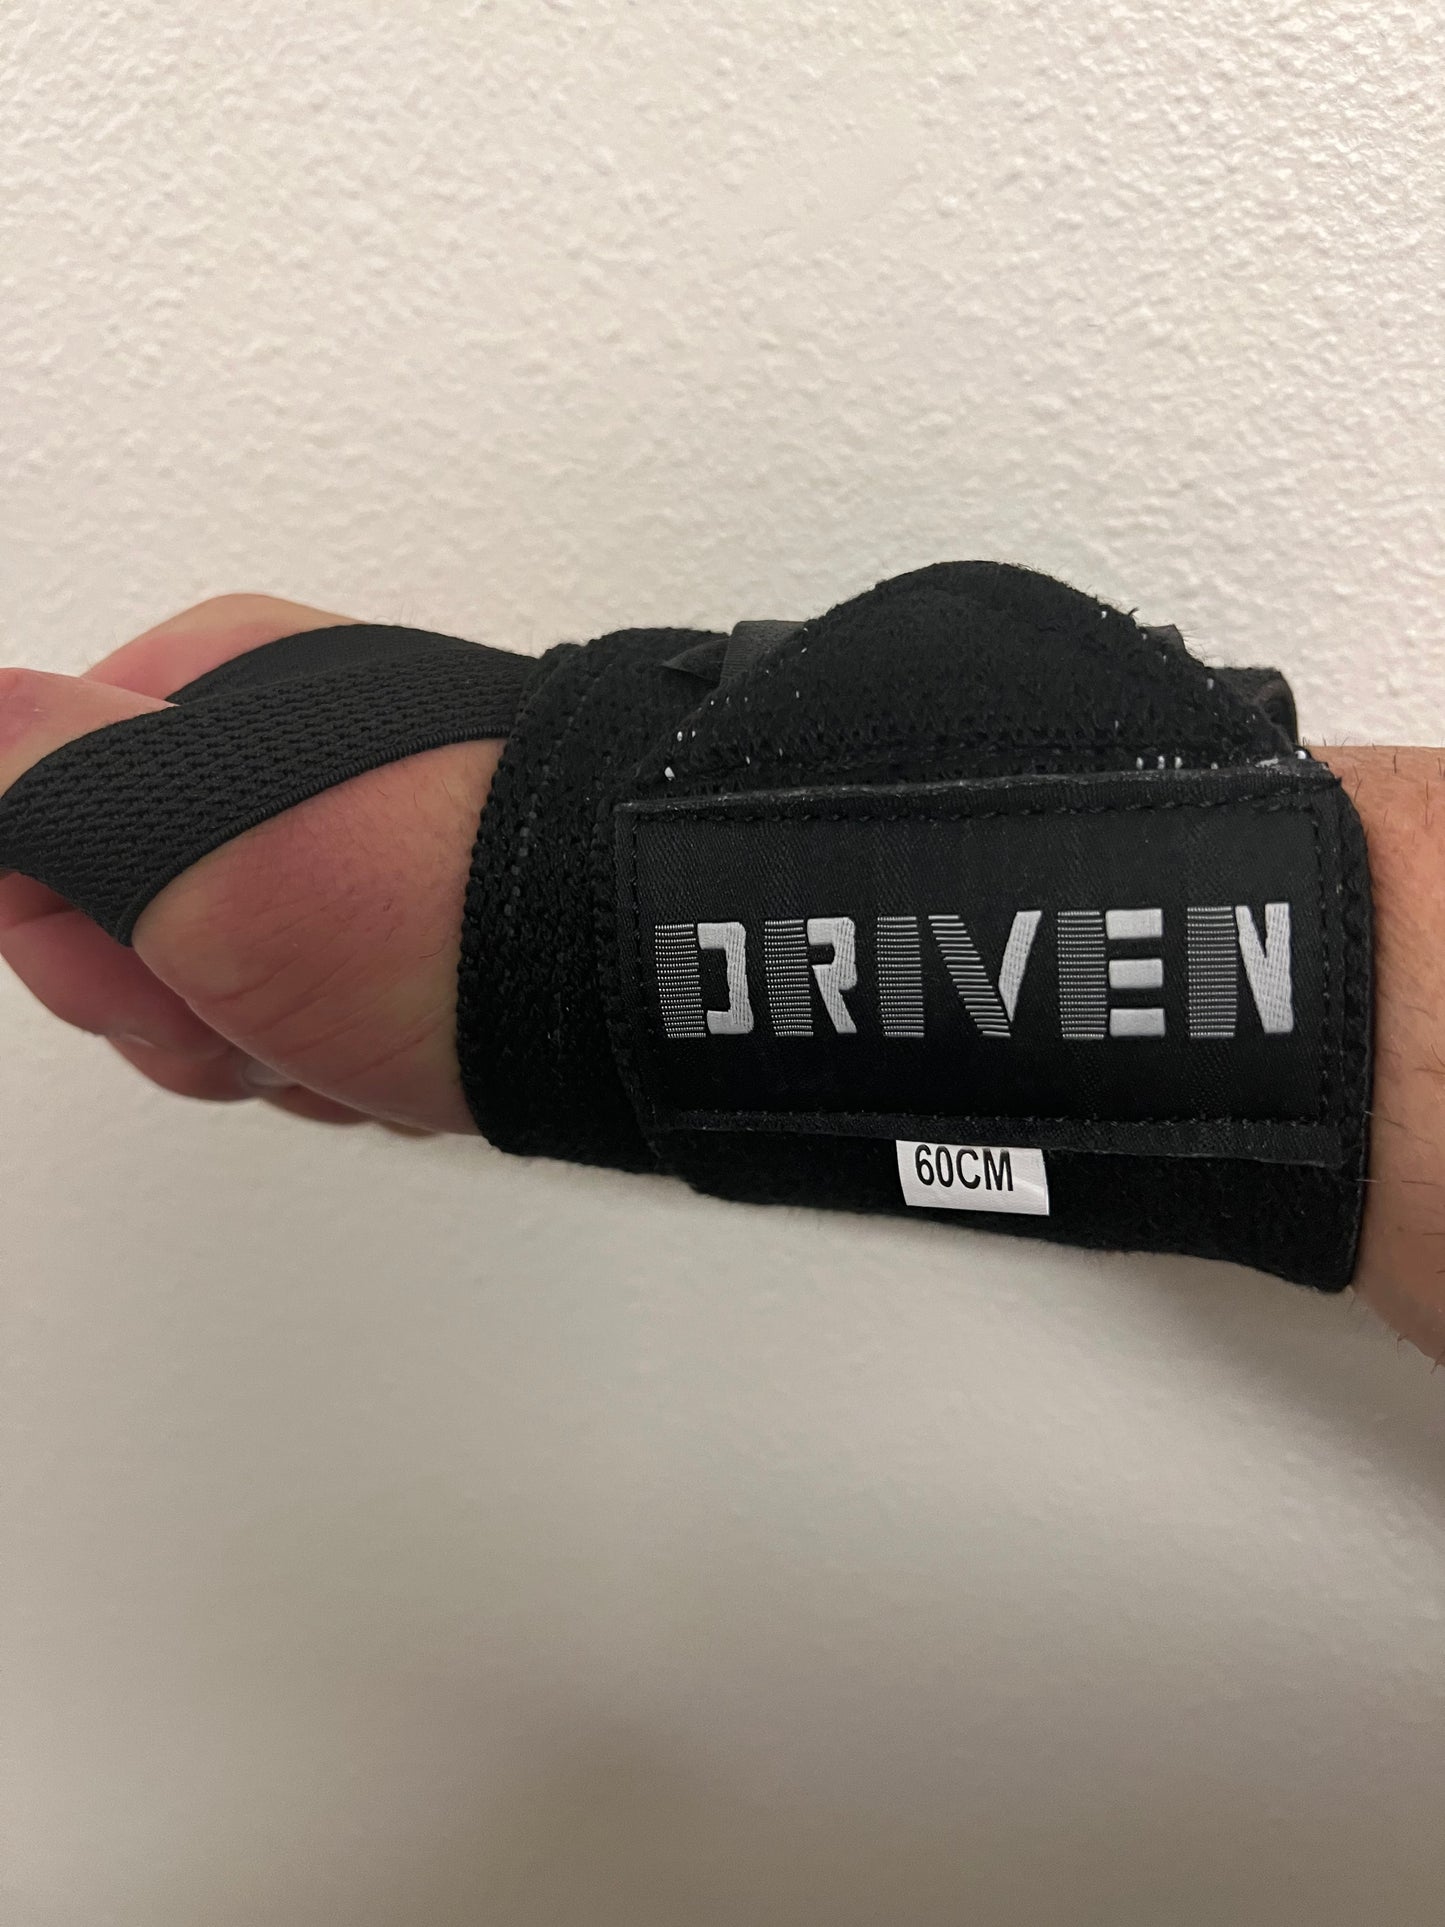 DRIVEN - Wrist Wraps Grippers